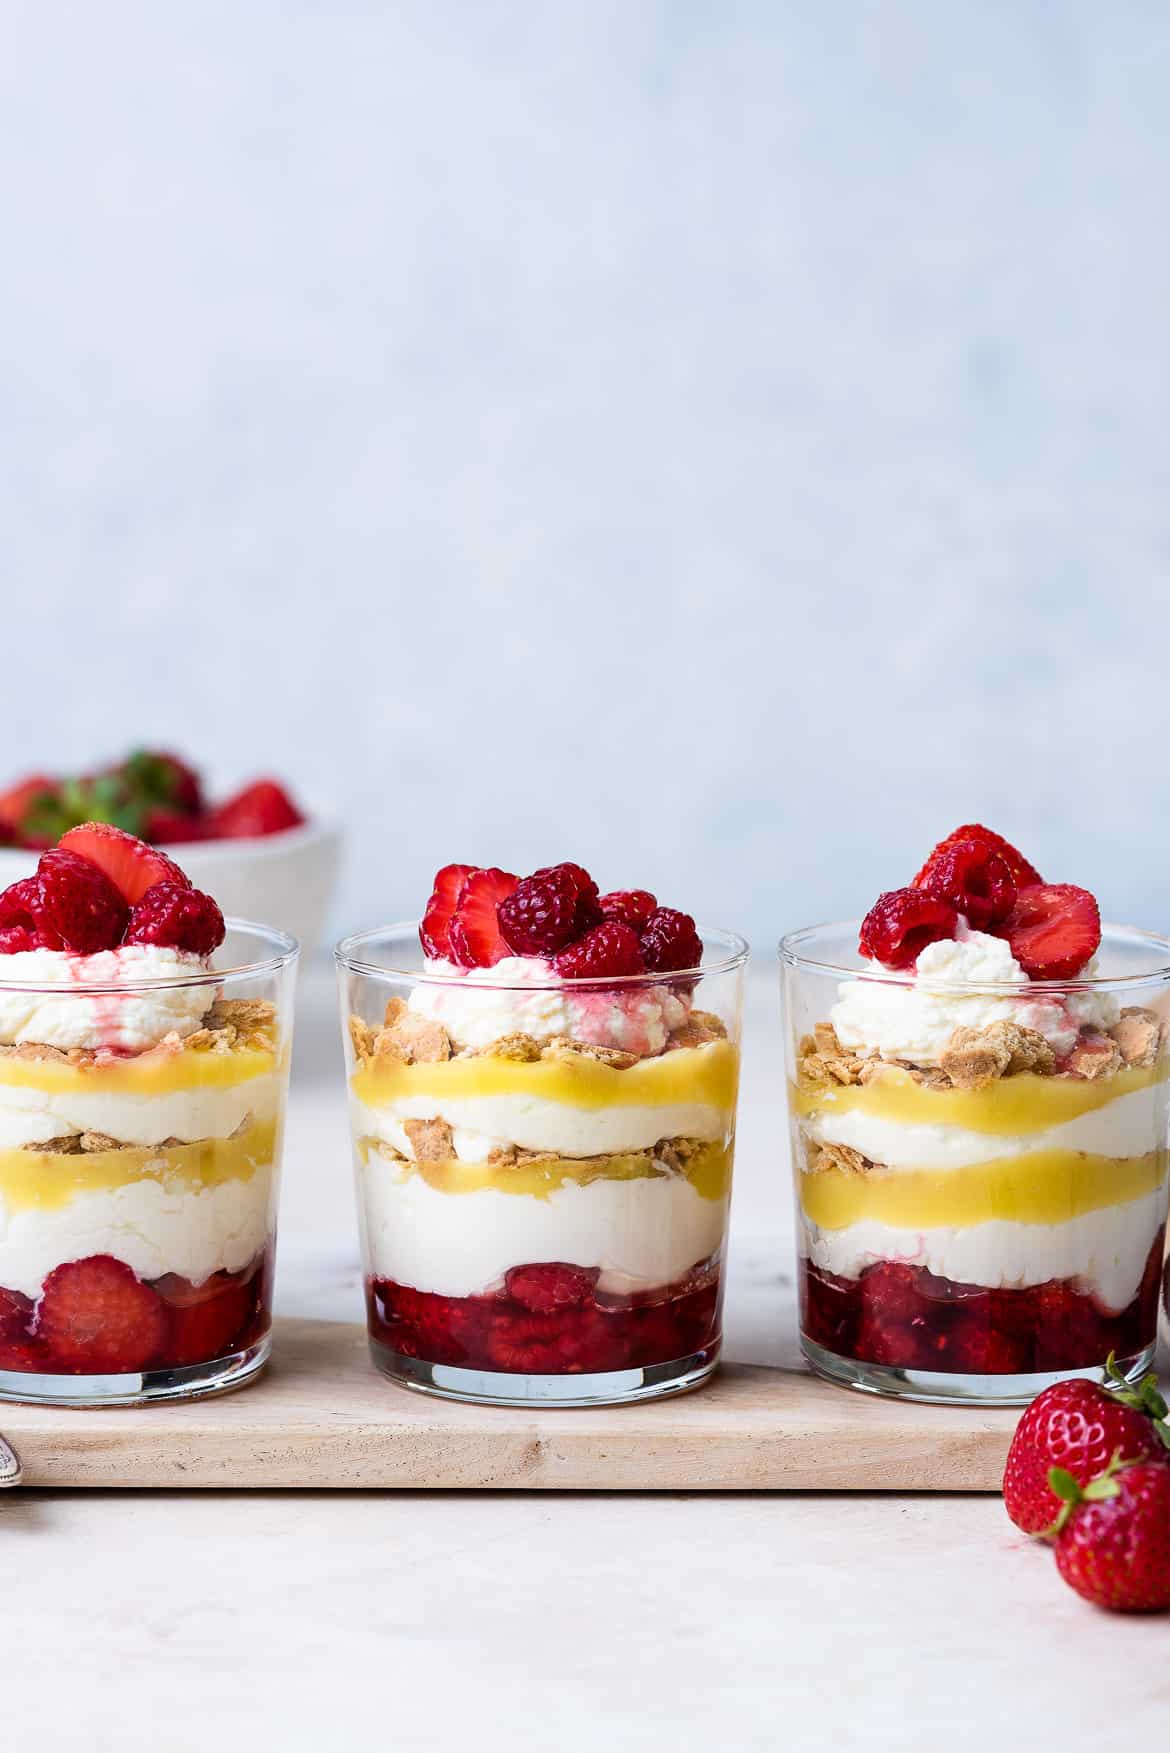 A row of Lemon-Berry Cheesecake Parfaits in glass cups.